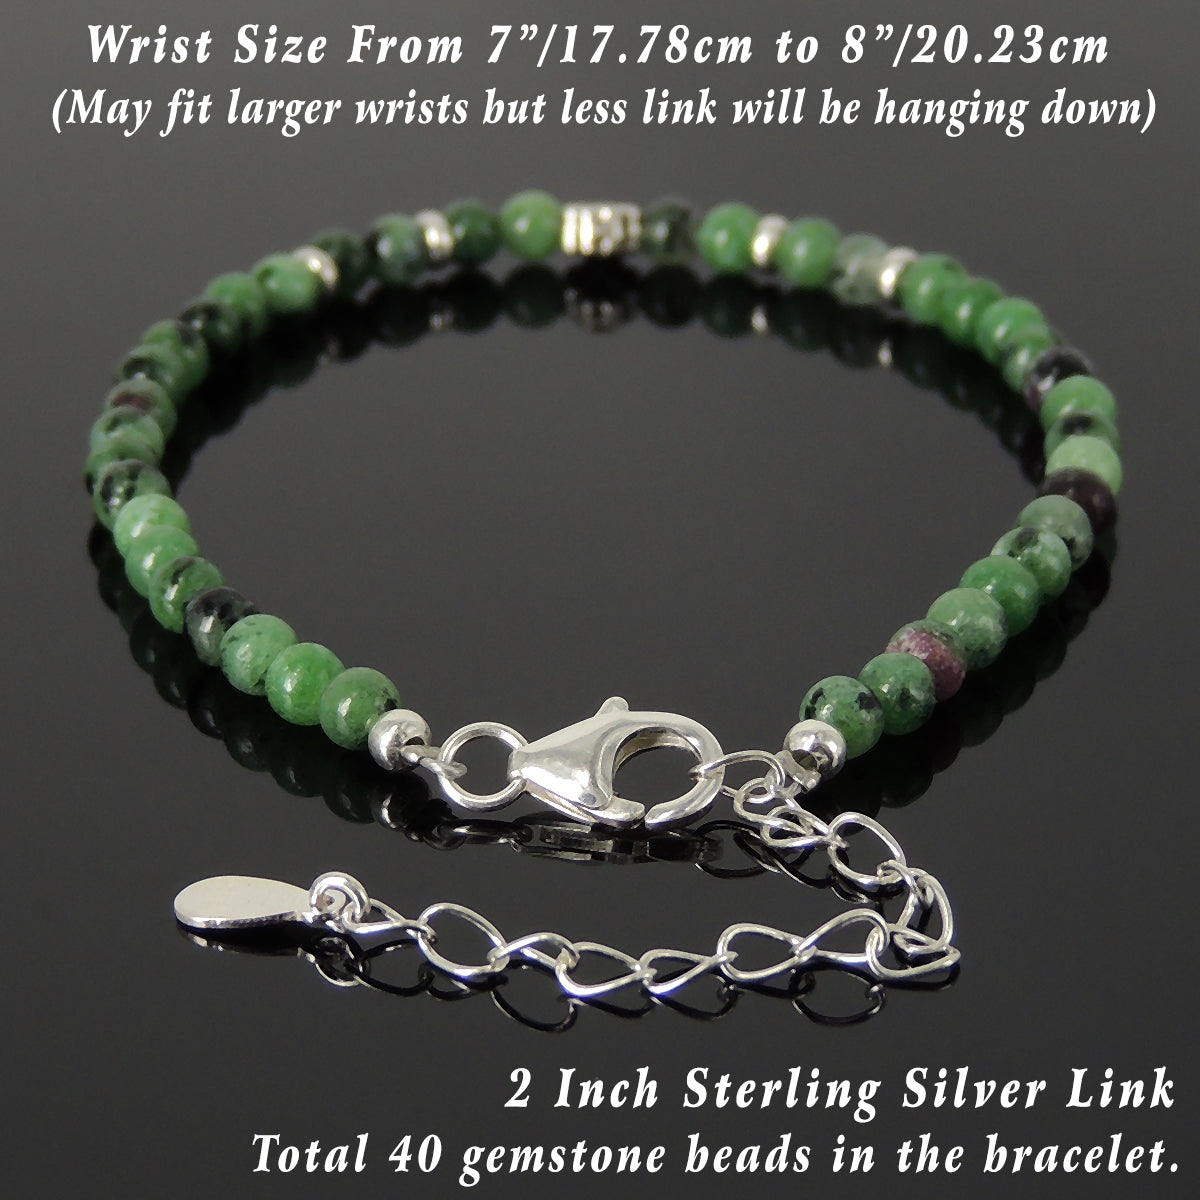 4mm Epidote Healing Gemstone Bracelet with S925 Sterling Silver Good Luck Charm Irish Clover, Chain, & Clasp - Handmade by Gem & Silver BR1453